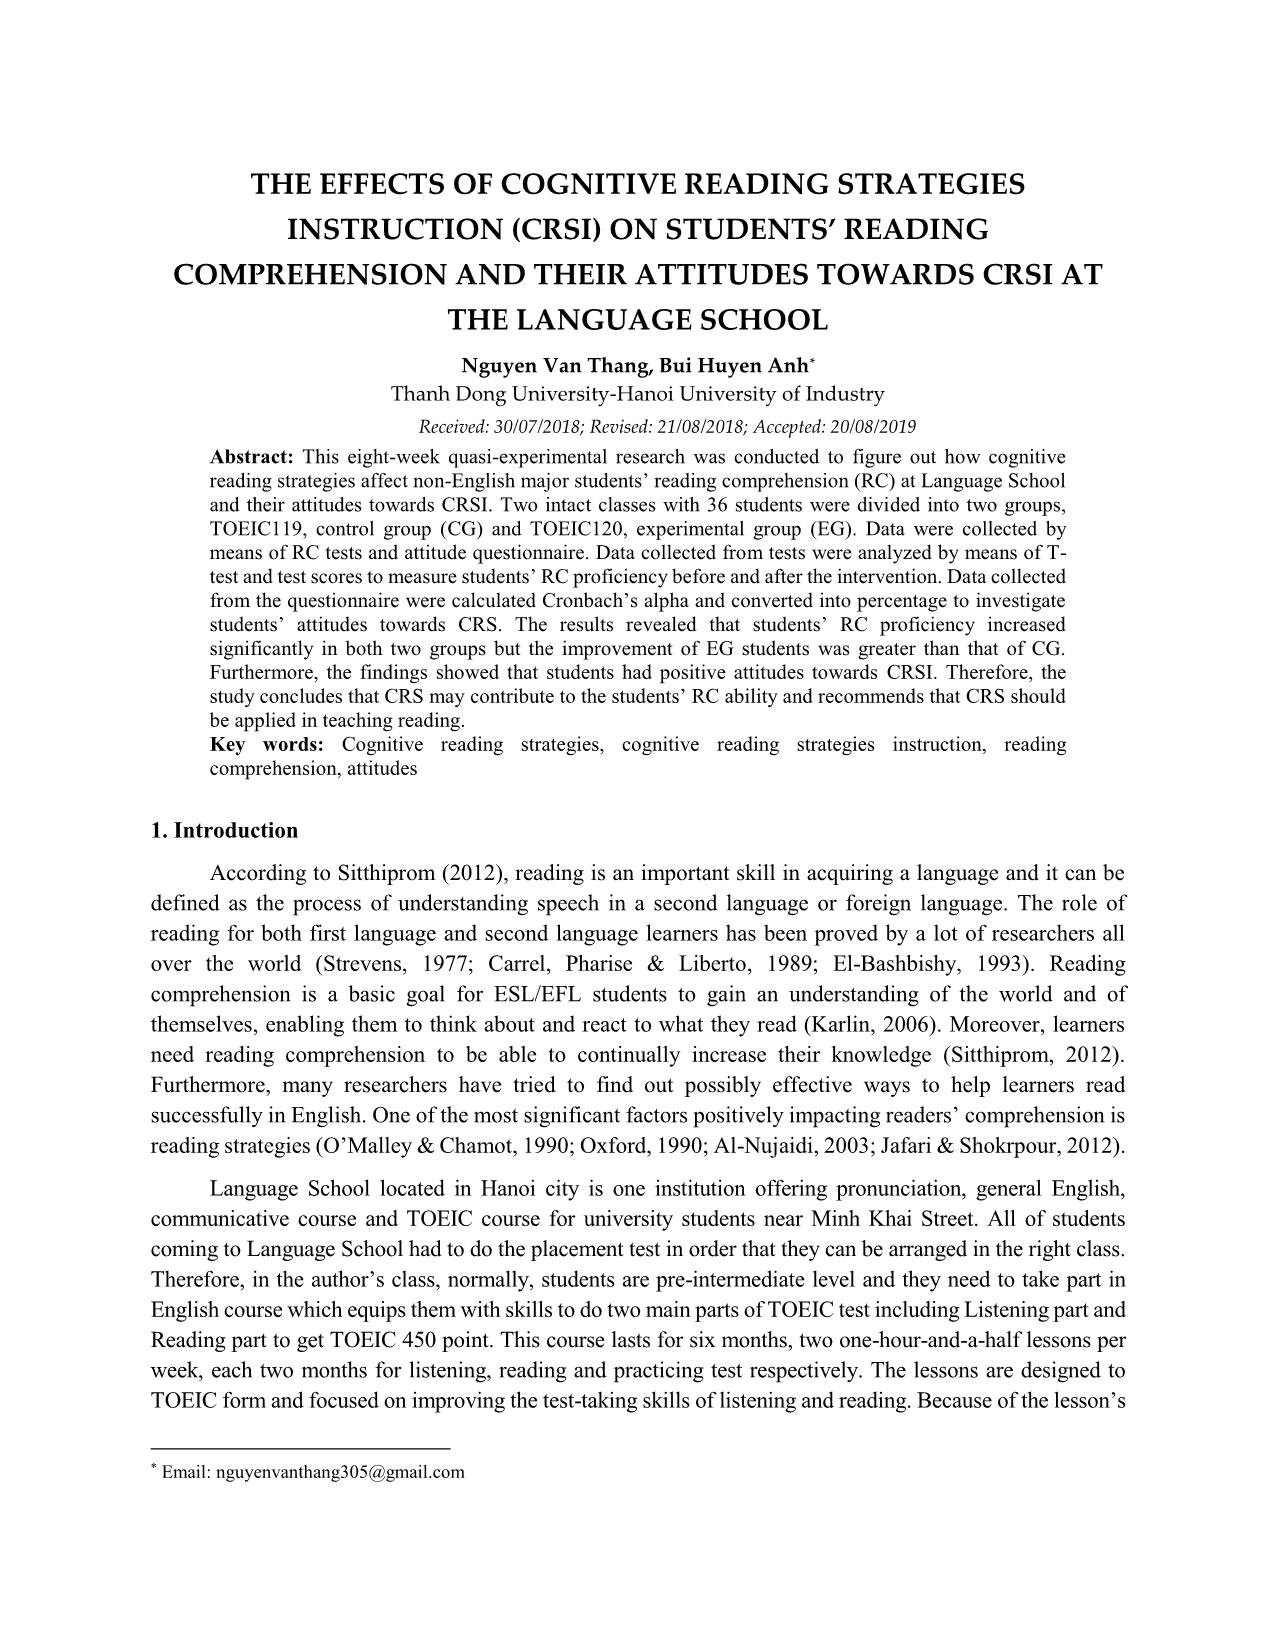 The effects of cognitive reading strategies instruction (crsi) on students’ reading comprehension and their attitudes towards crsi at the language school trang 1